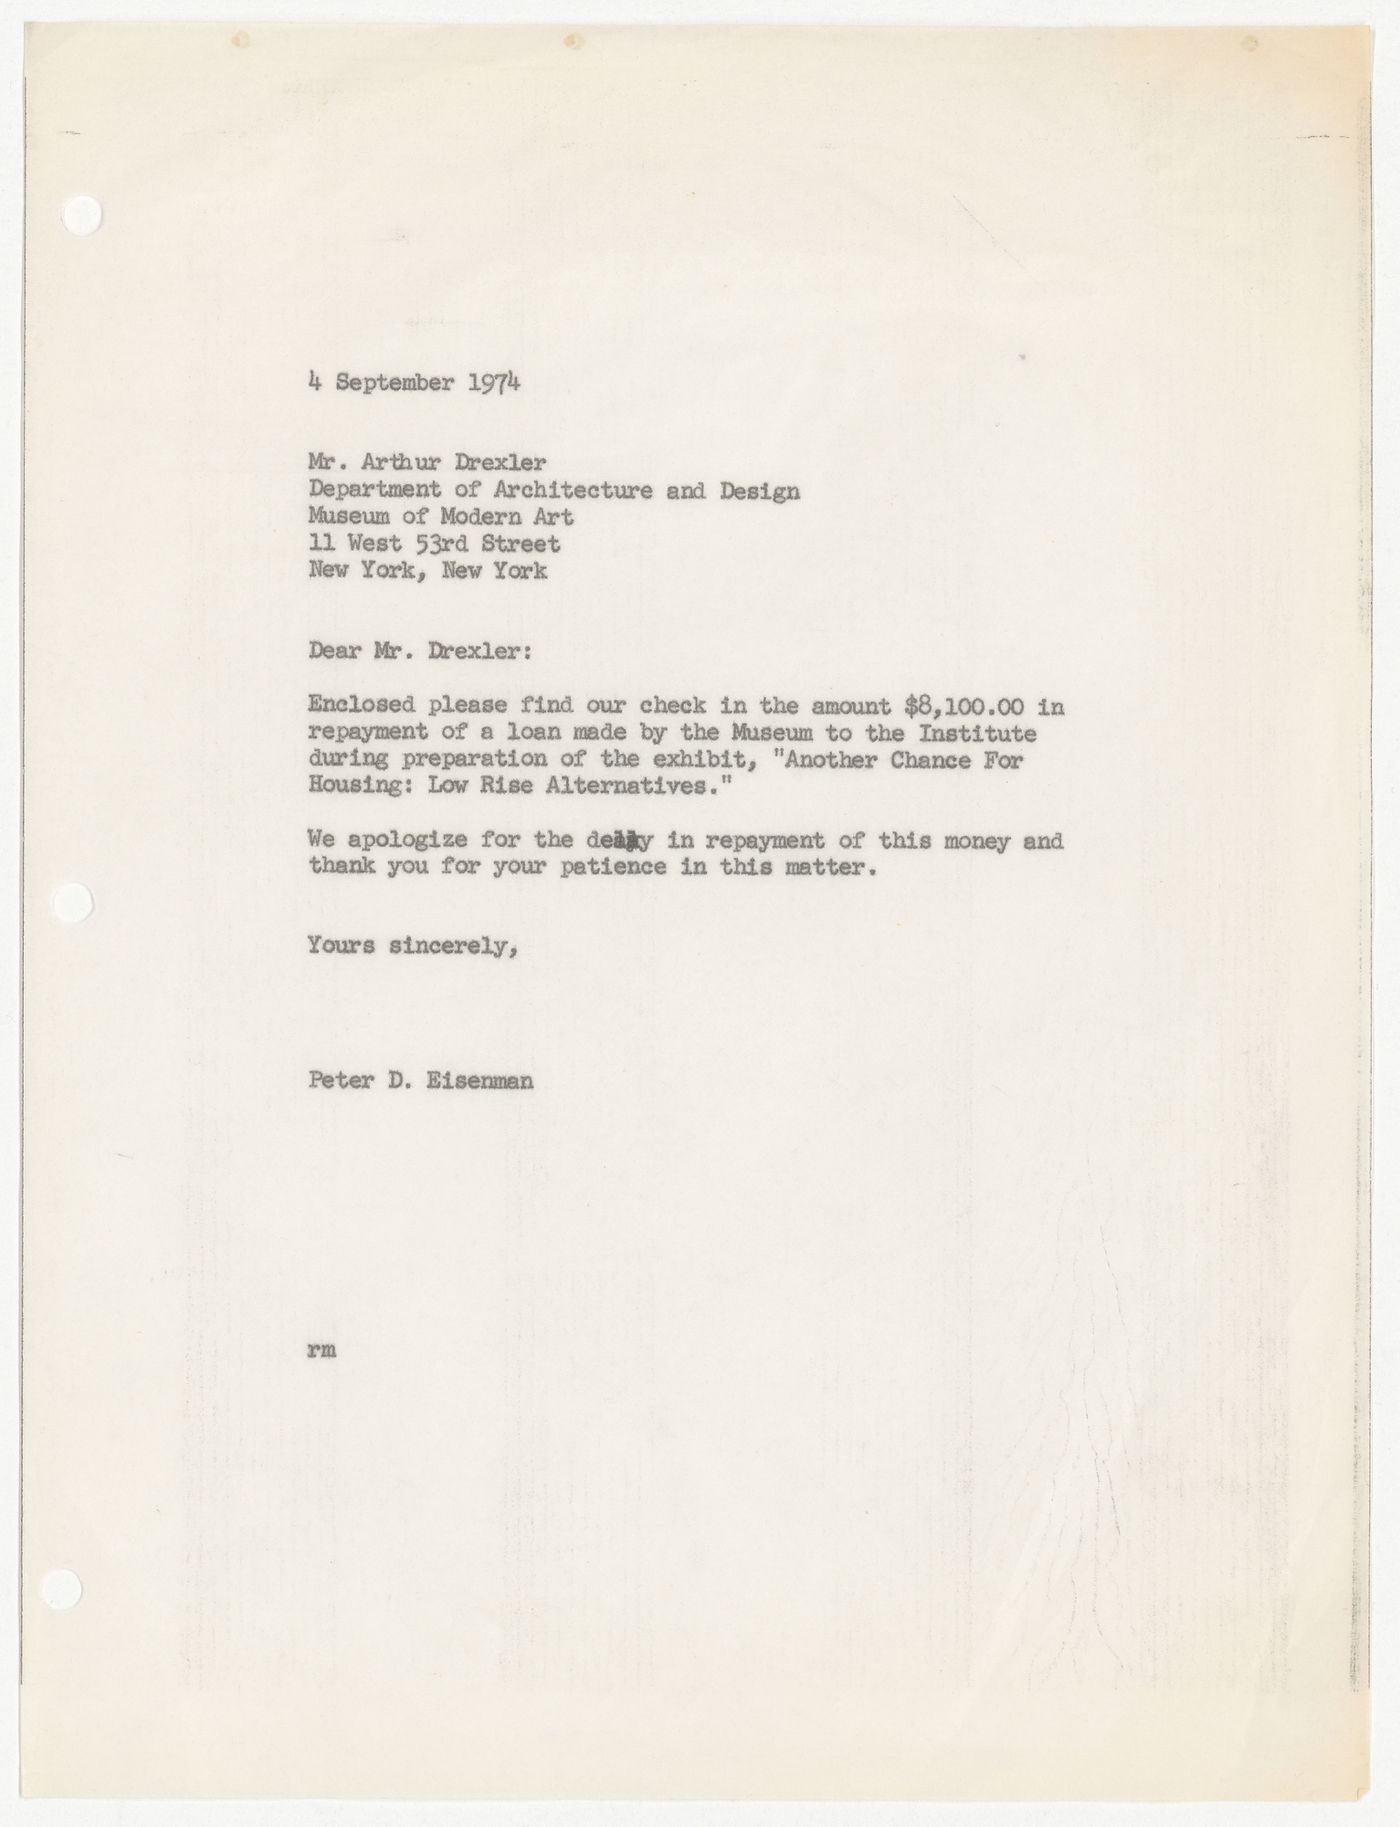 Letter from Peter D. Eisenman to Arthur Drexler about repayment of loan made by Museum of Modern Art (MoMA) to IAUS